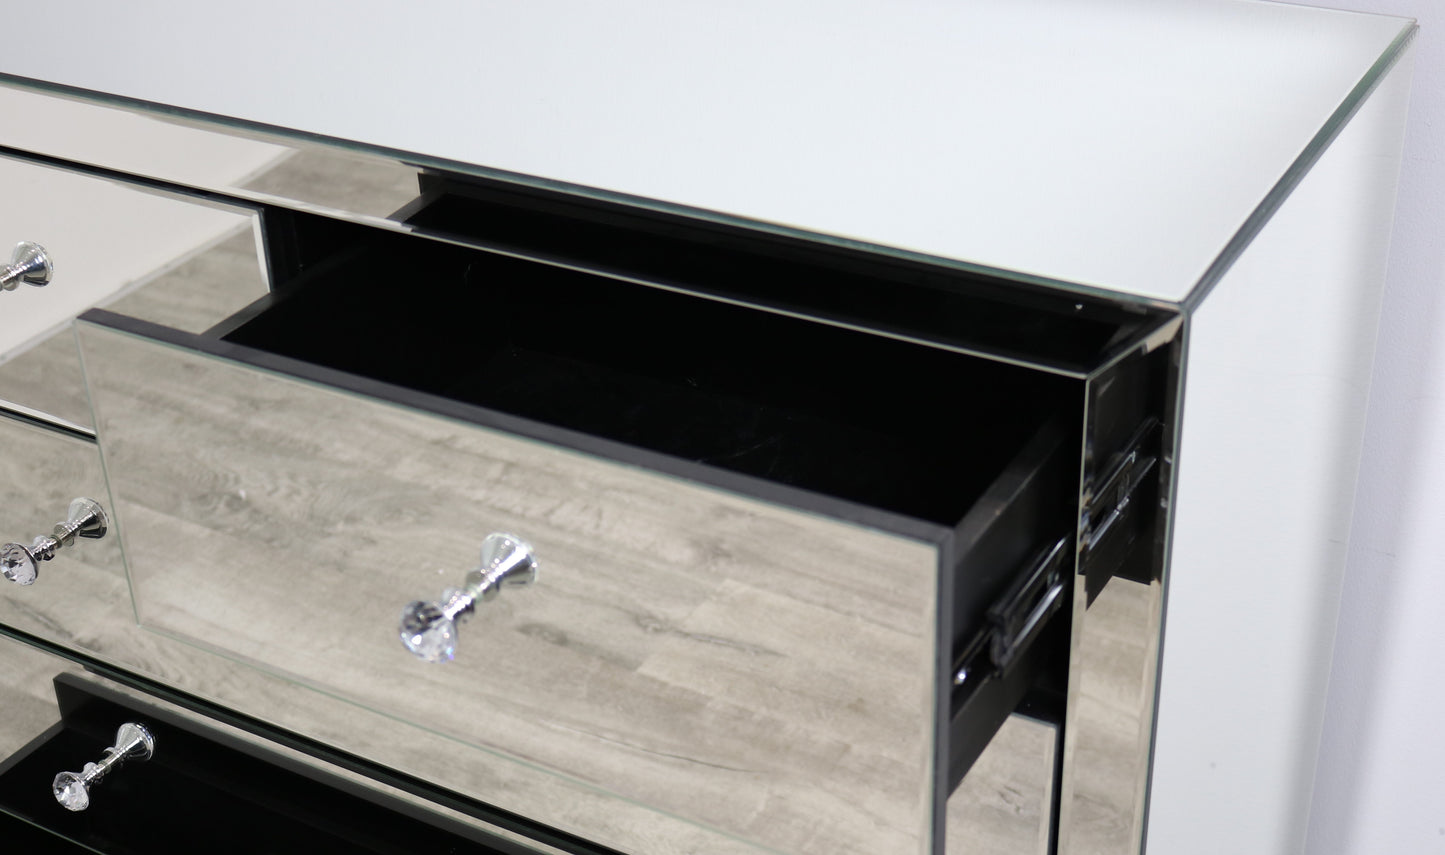 Mirrored Chest Of Drawers